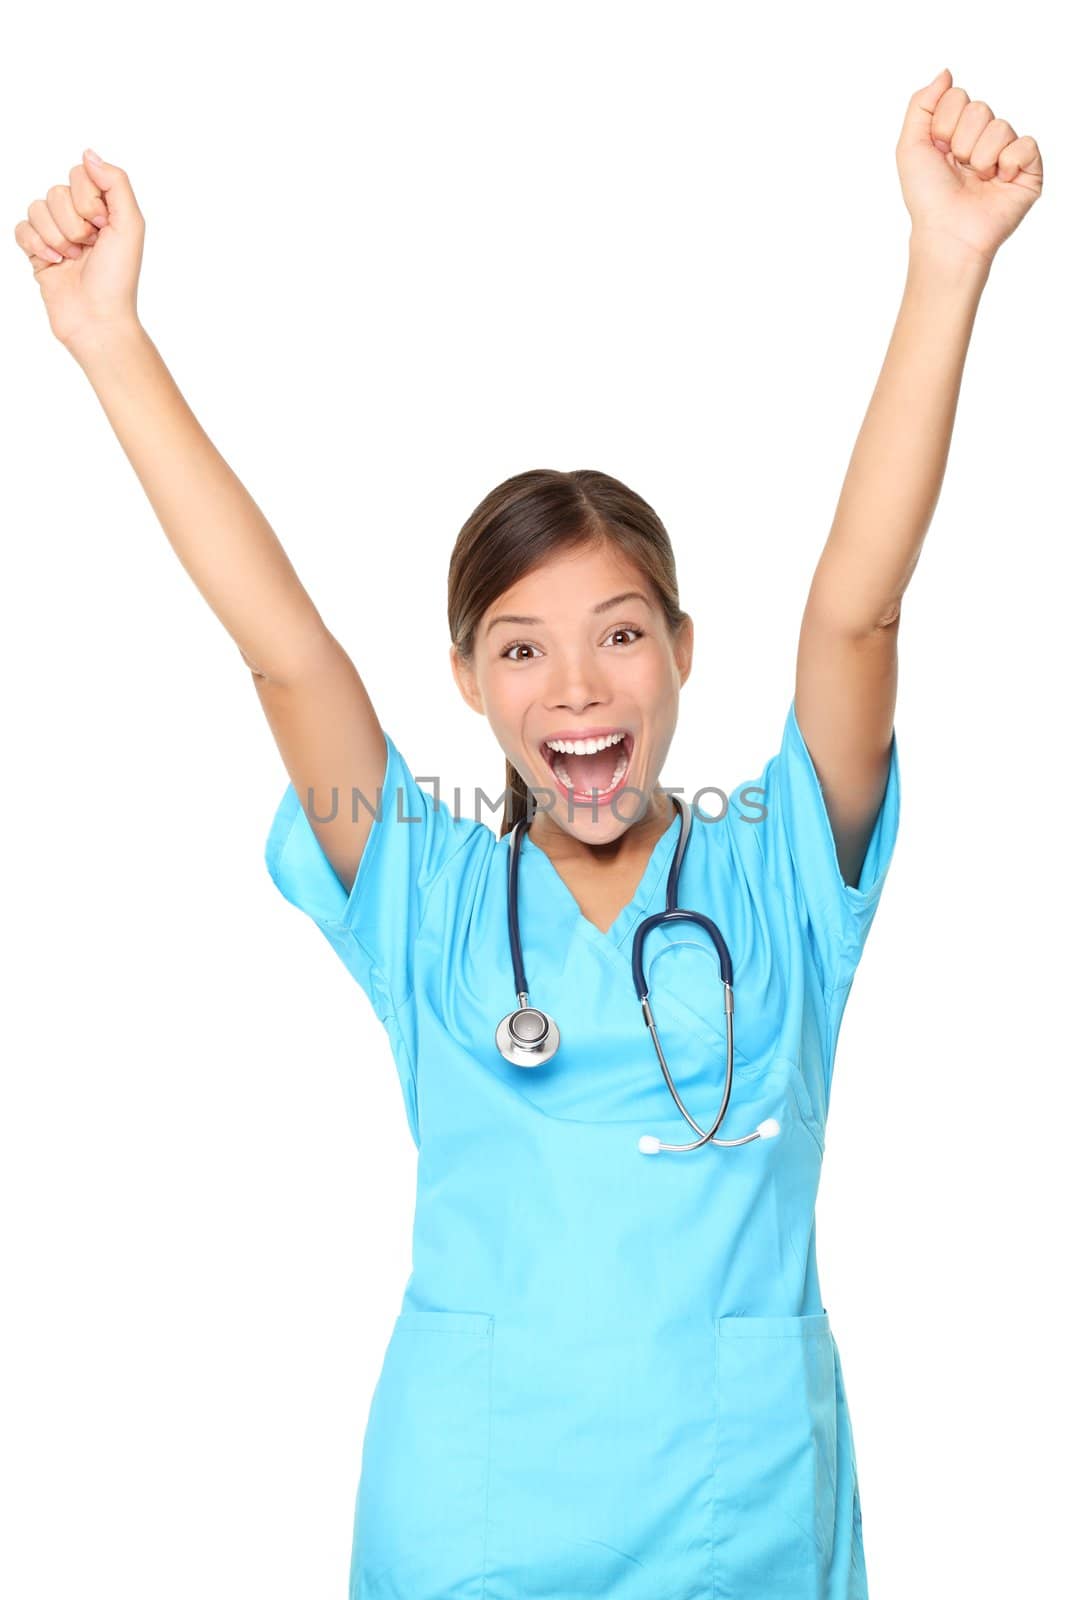 Nurse excited. Happy cheerful woman nurse (or young doctor) with arms up. Isolated on white background. Young mixed-race Asian / Caucasian female medical professional.